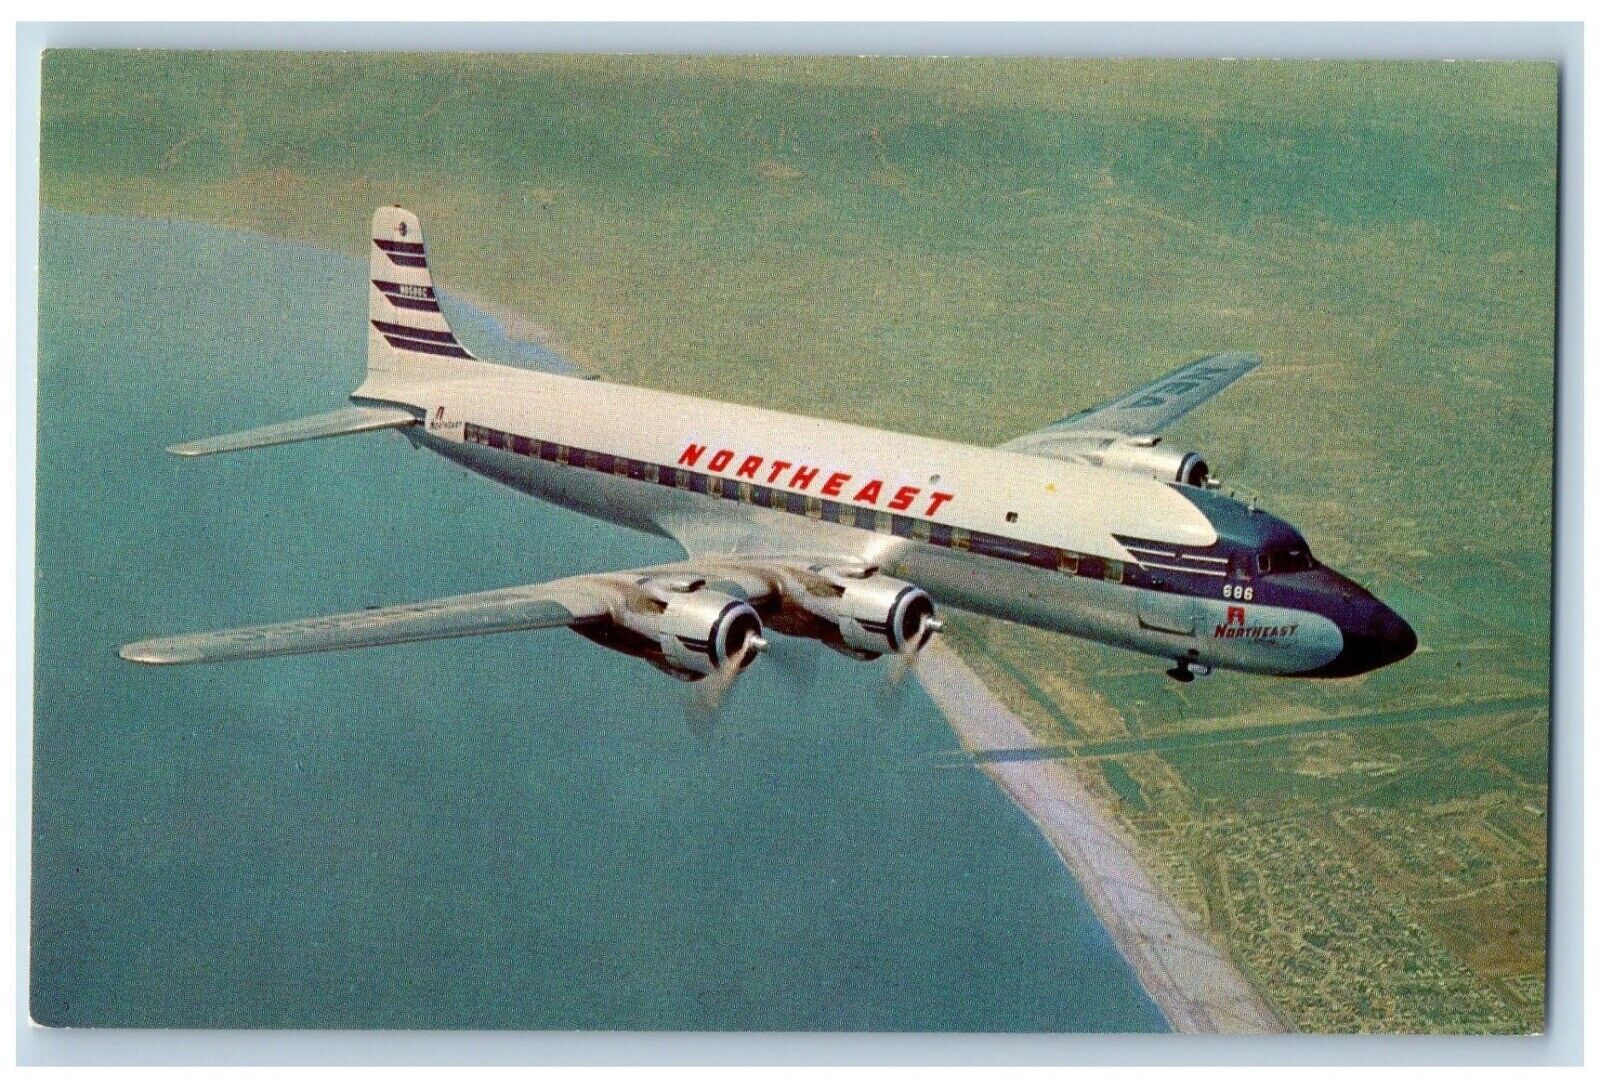 Airplane Postcard Northeast Sunliners Flight Aircraft Plane Vintage Unposted